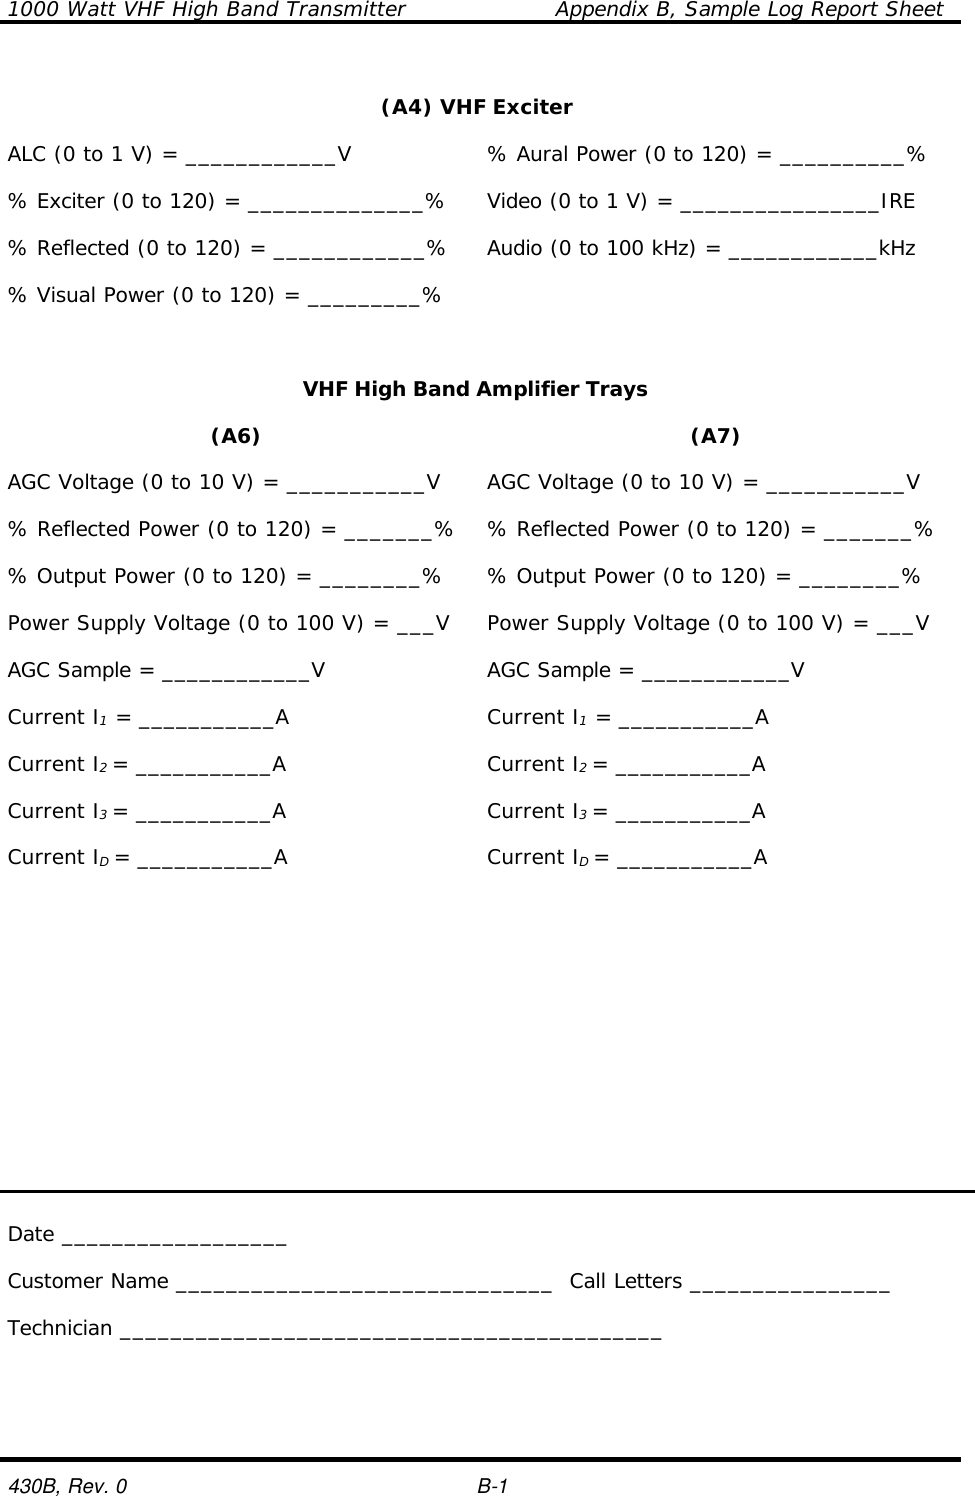 1000 Watt VHF High Band Transmitter    Appendix B, Sample Log Report Sheet  430B, Rev. 0    B-1  (A4) VHF Exciter    ALC (0 to 1 V) = ____________V % Aural Power (0 to 120) = __________%    % Exciter (0 to 120) = ______________% Video (0 to 1 V) = ________________IRE    % Reflected (0 to 120) = ____________% Audio (0 to 100 kHz) = ____________kHz    % Visual Power (0 to 120) = _________%      VHF High Band Amplifier Trays    (A6) (A7)    AGC Voltage (0 to 10 V) = ___________V AGC Voltage (0 to 10 V) = ___________V    % Reflected Power (0 to 120) = _______% % Reflected Power (0 to 120) = _______%    % Output Power (0 to 120) = ________% % Output Power (0 to 120) = ________%    Power Supply Voltage (0 to 100 V) = ___V Power Supply Voltage (0 to 100 V) = ___V    AGC Sample = ____________V AGC Sample = ____________V    Current I1 = ___________A Current I1 = ___________A    Current I2 = ___________A Current I2 = ___________A    Current I3 = ___________A Current I3 = ___________A    Current ID = ___________A Current ID = ___________A                   Date __________________  Customer Name ______________________________  Call Letters ________________  Technician ___________________________________________ 